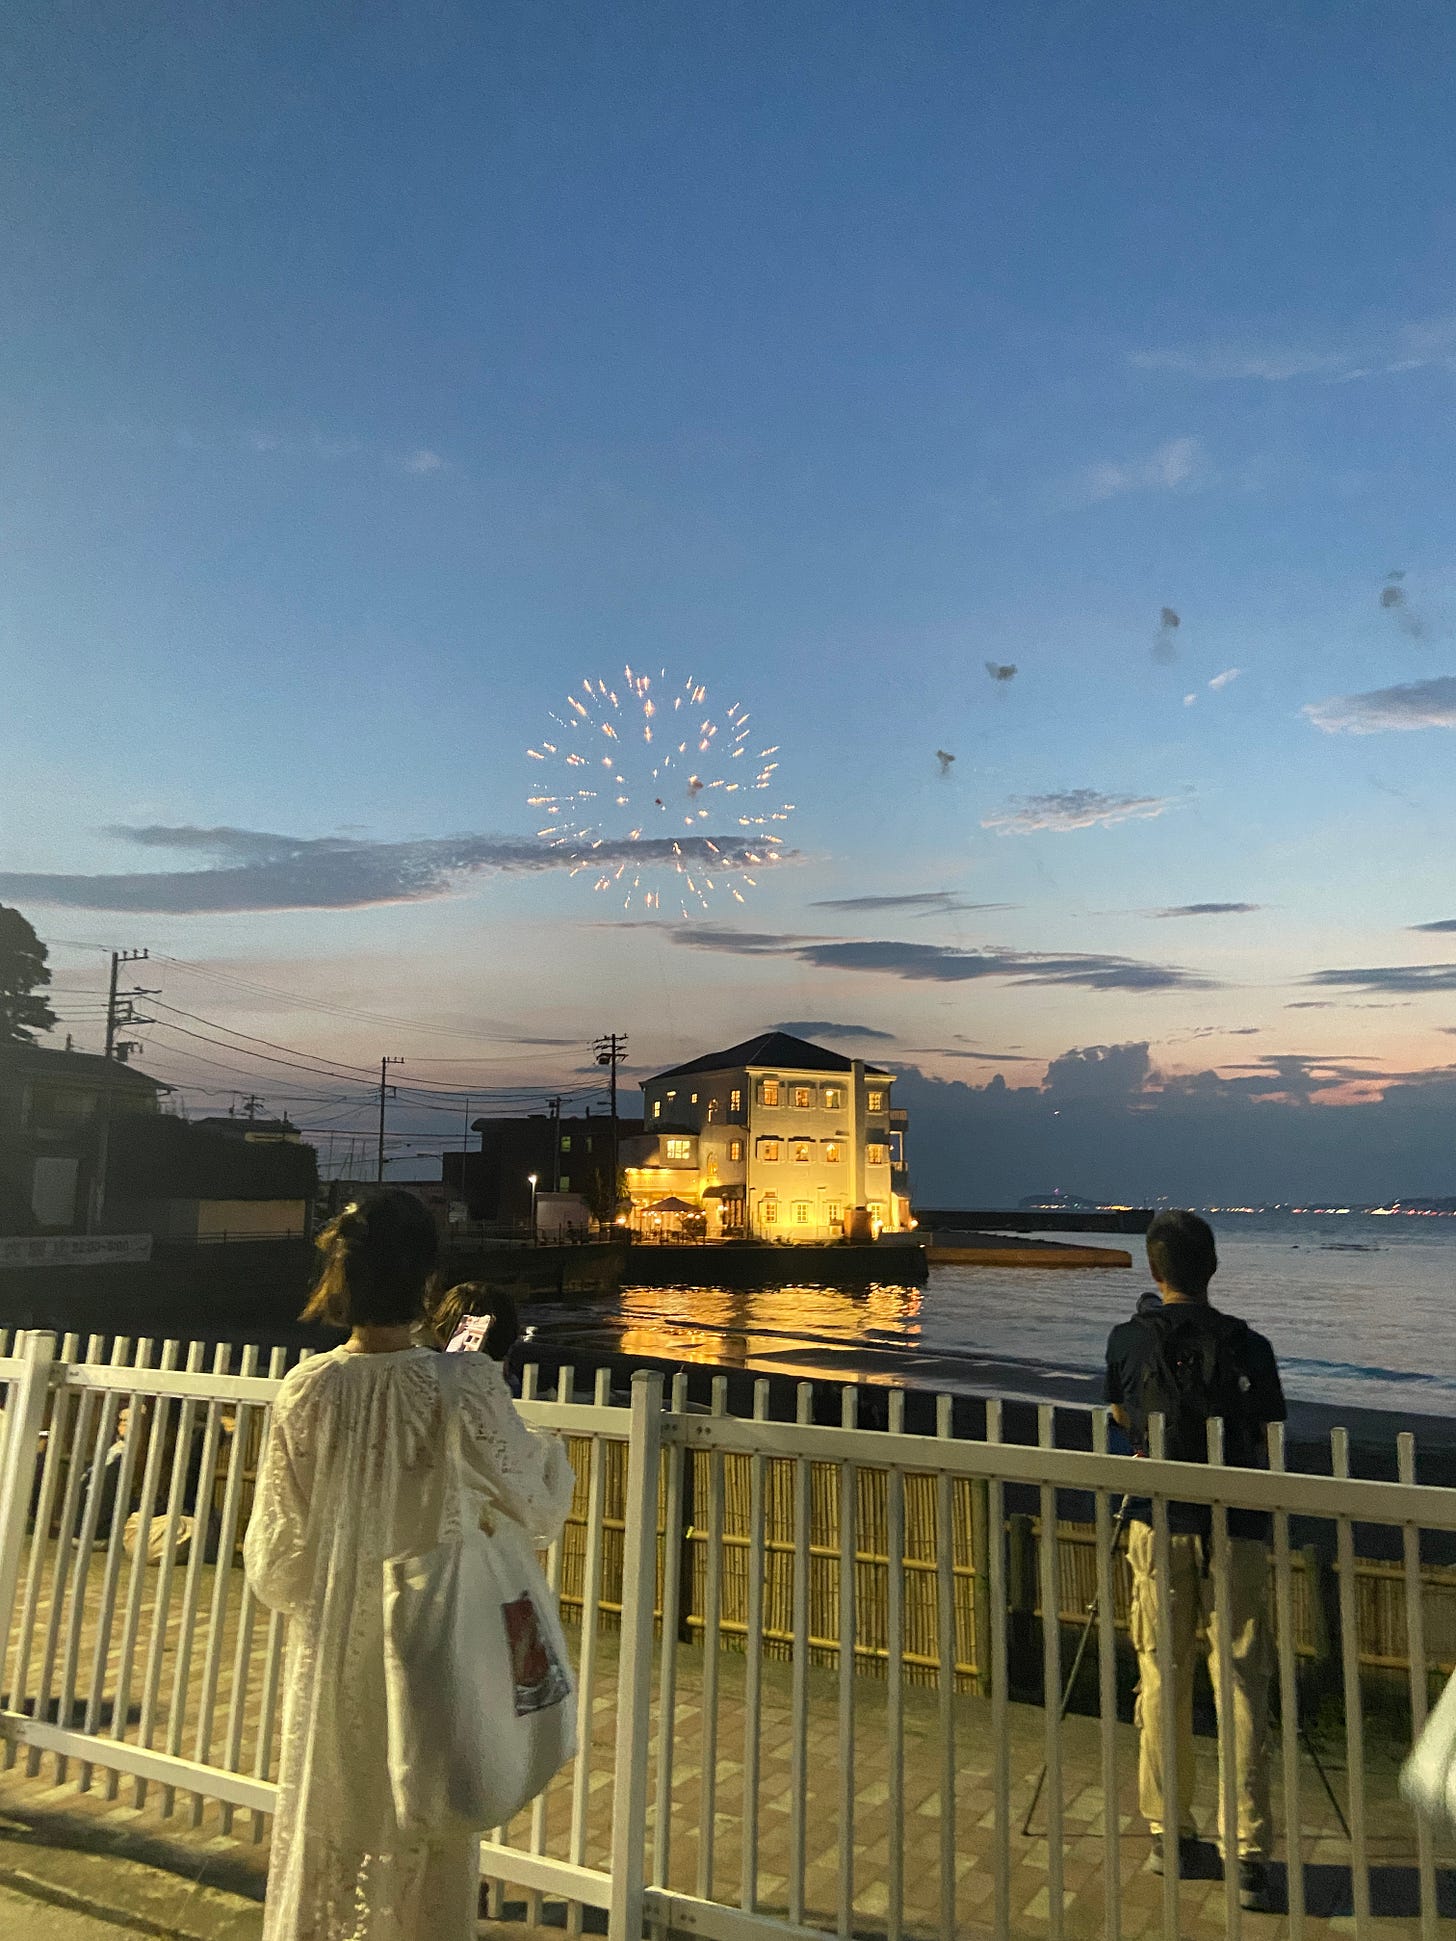 sunset fireworks over the ocean, a white house on the coastline as two people stand in the foreground taking pictures